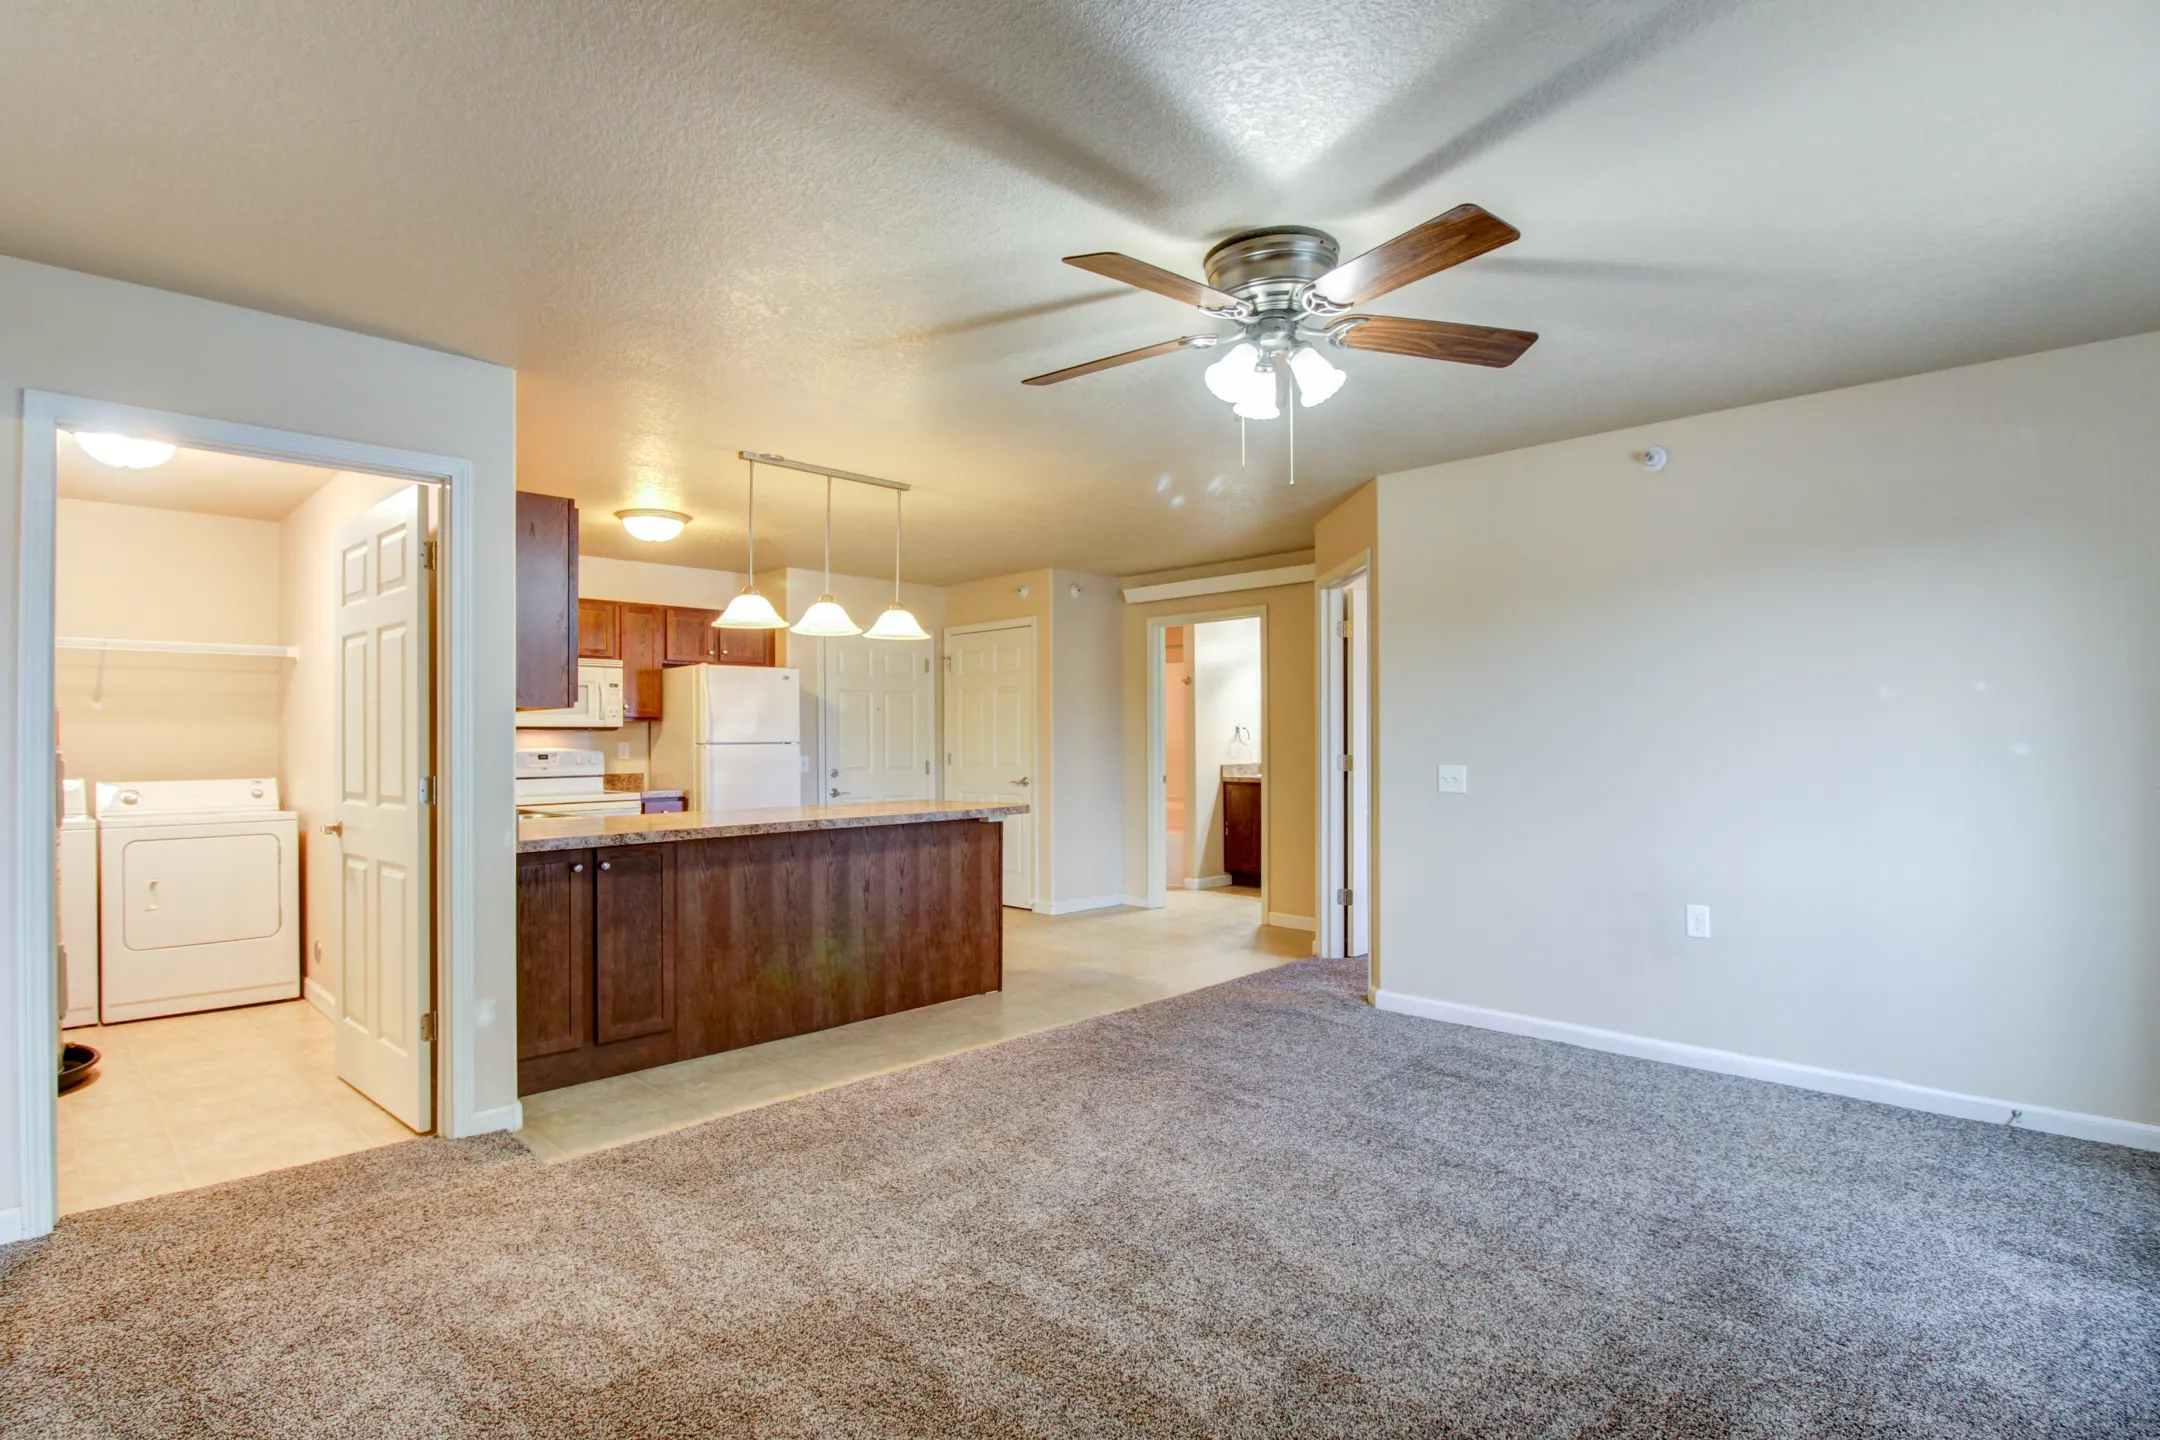 Living Room - Northdale Apartments - Minot, ND